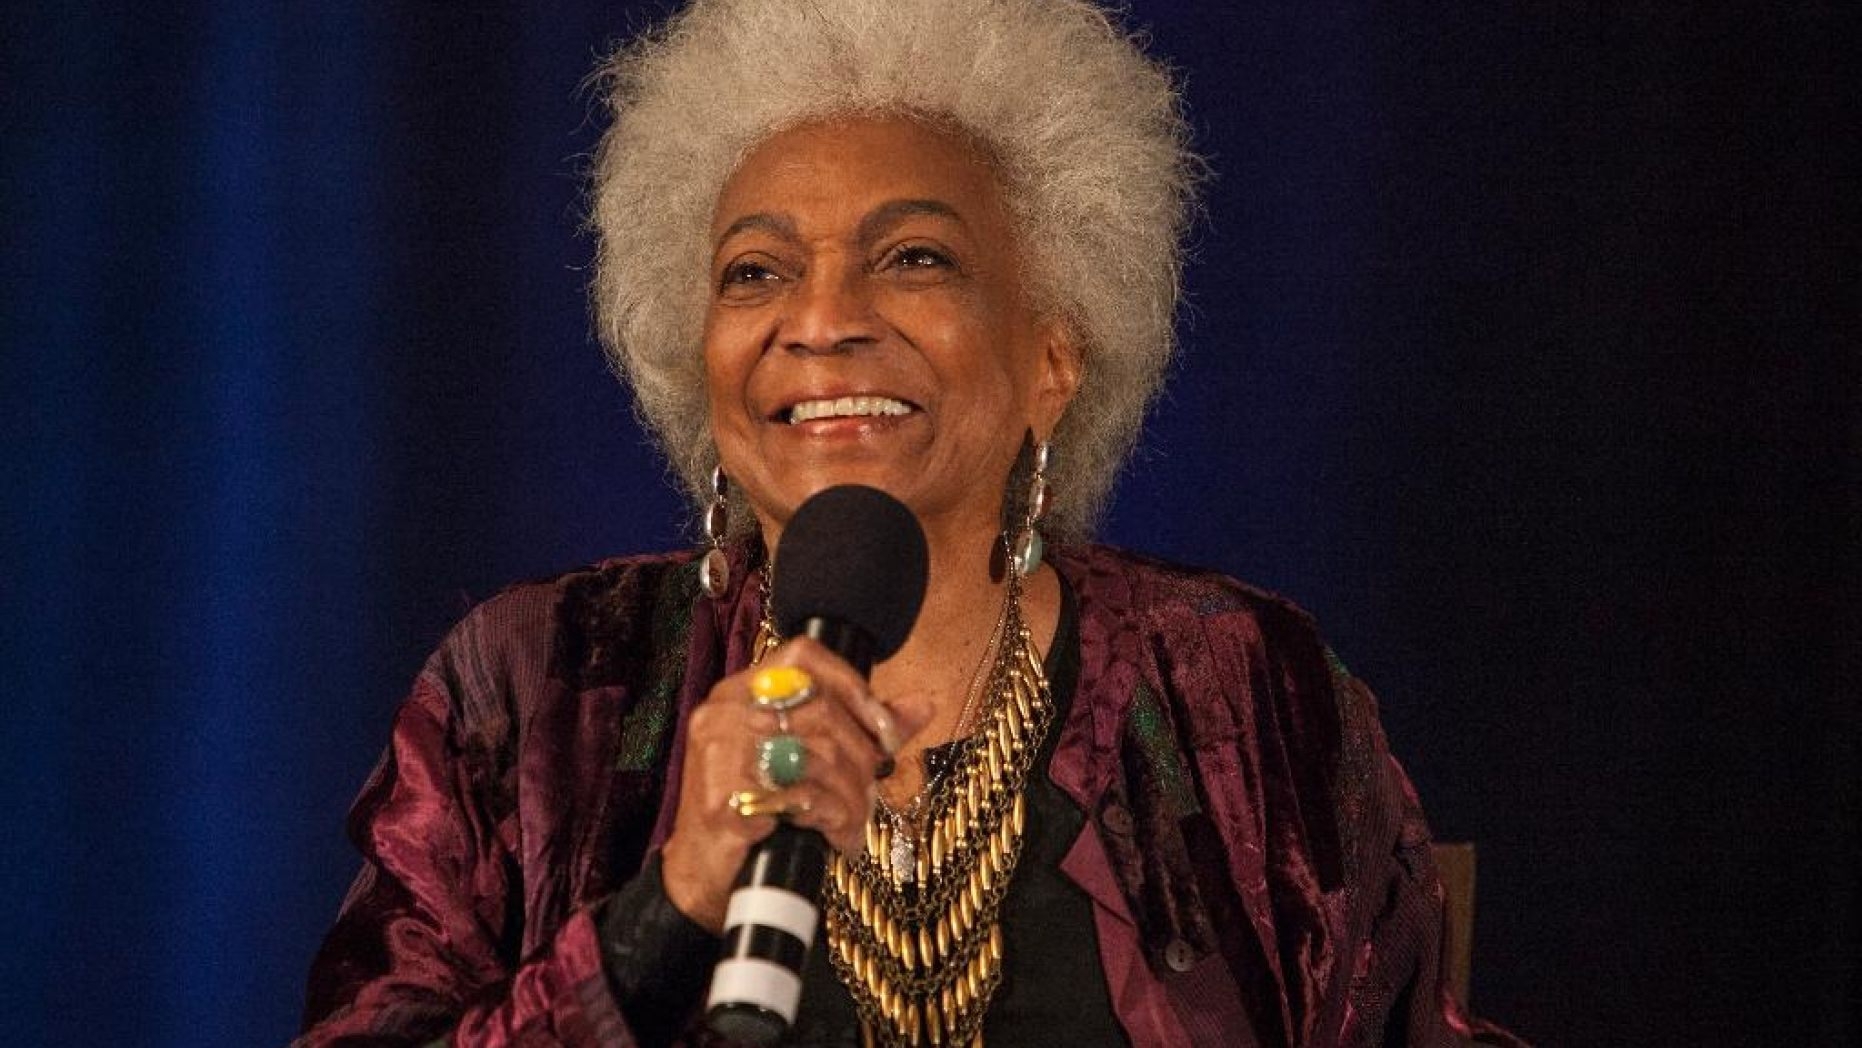 ‘Star Trek’ actress Nichelle Nichols, 86, said to be heard screaming for help in audio recording: report